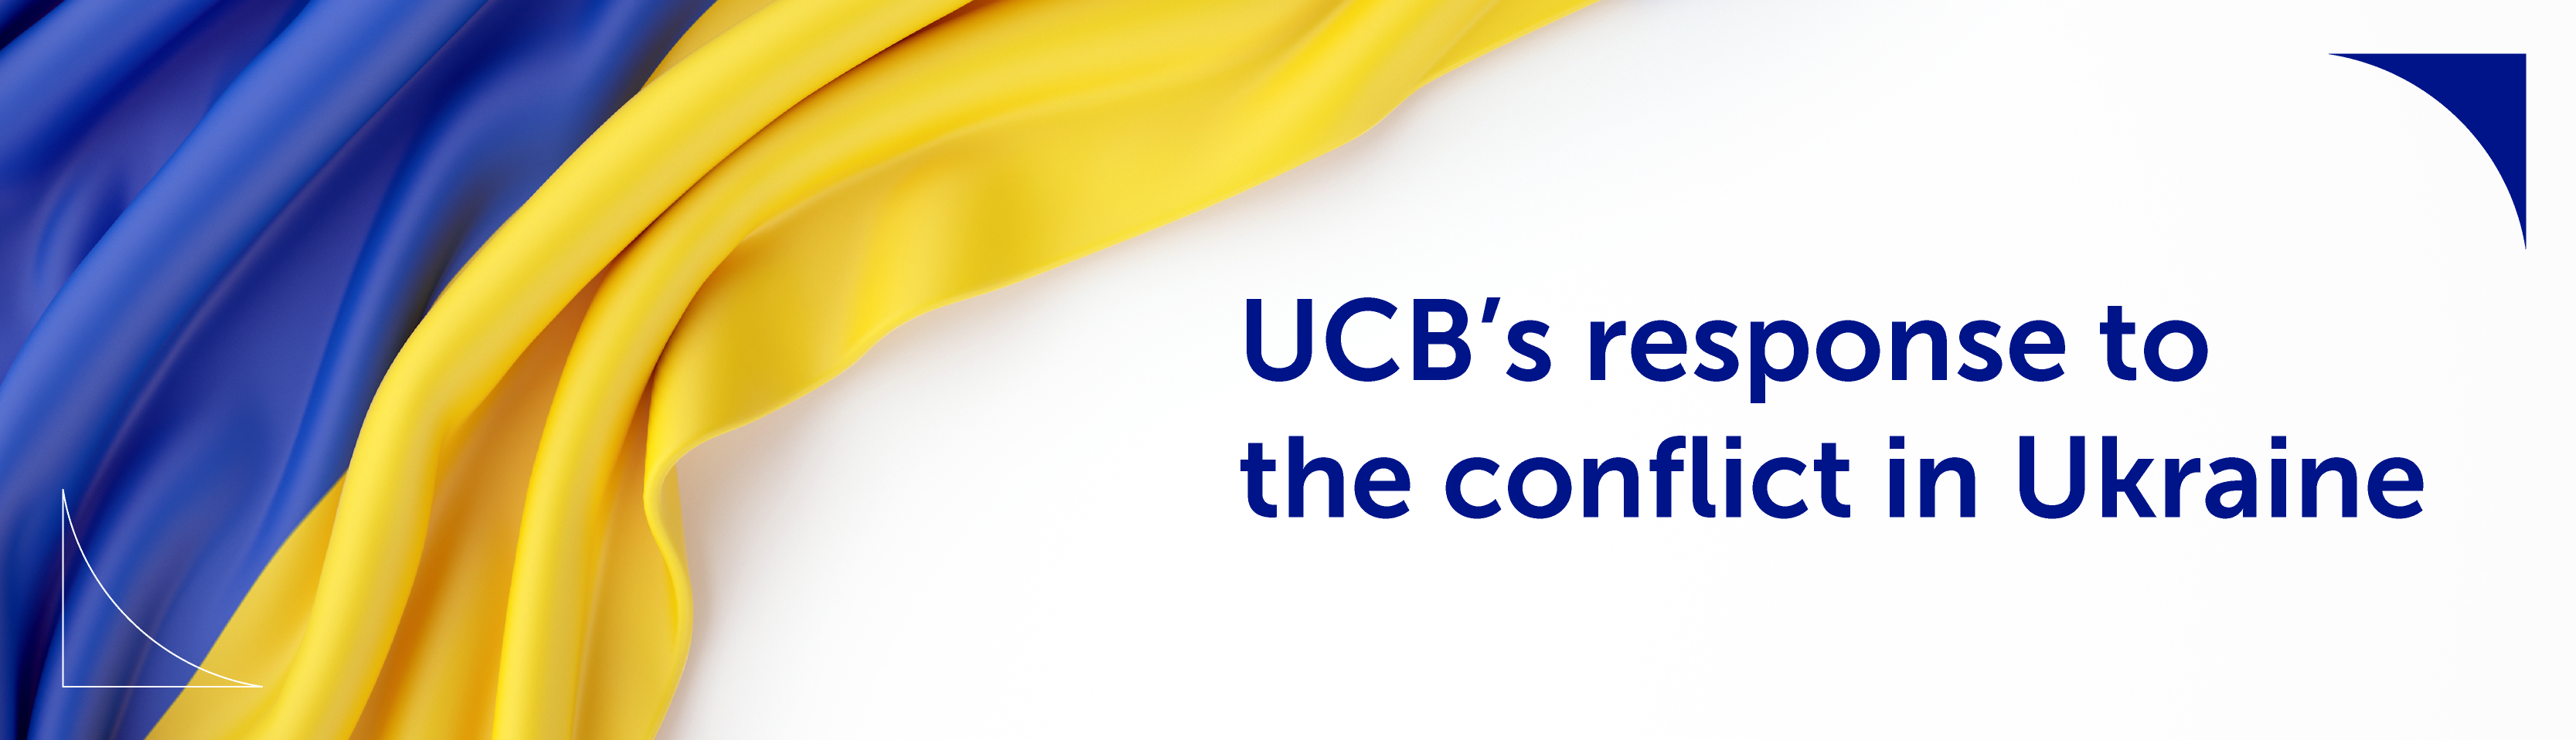 UCB-response-to-the-conflict-in-Ukraine.png 